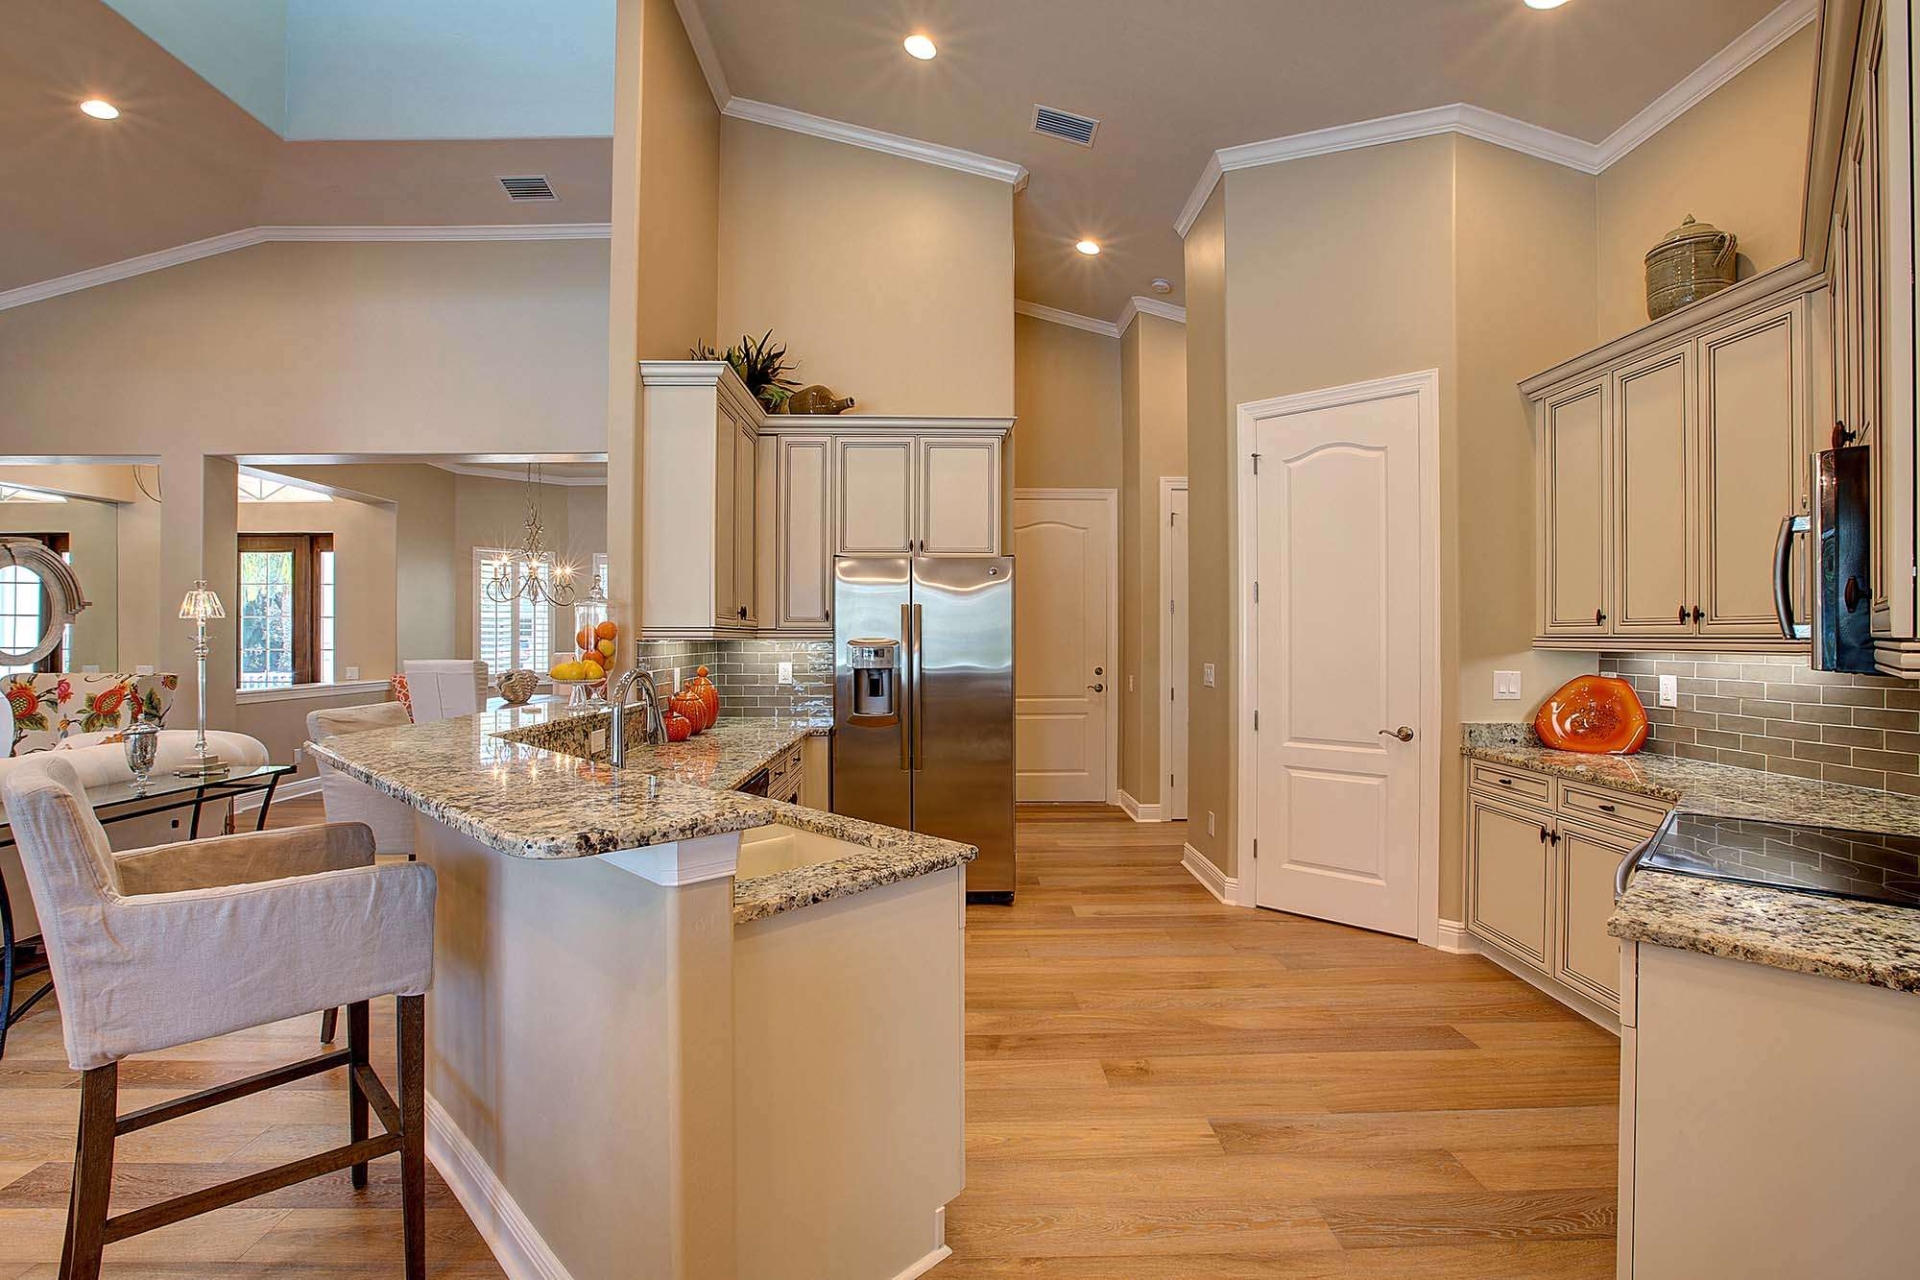 The kitchen in the Useppa Model Home at Shell Point Retirement Community